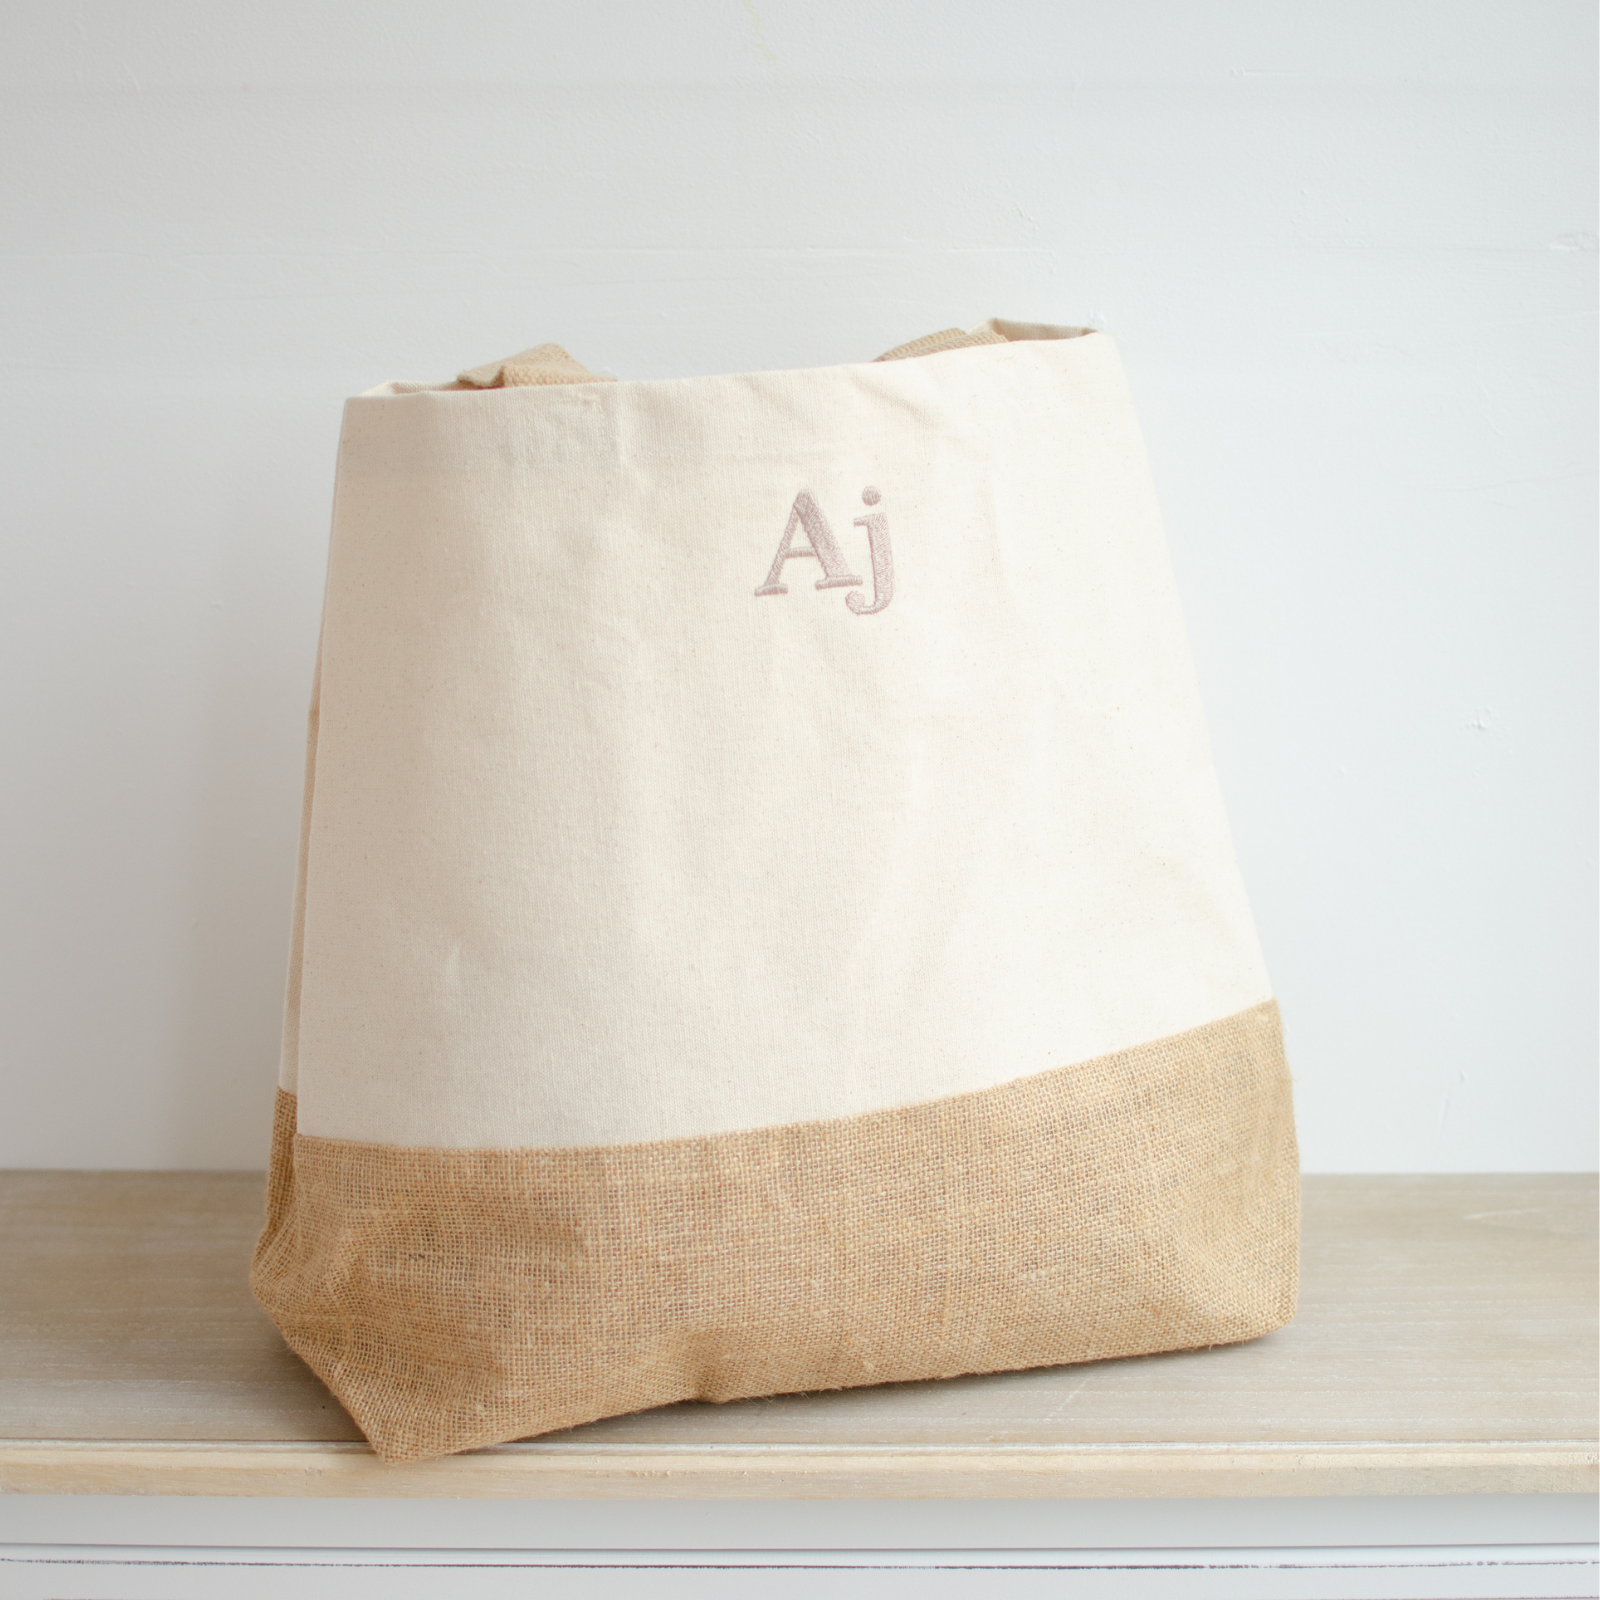 Image of a personalised neutral coloured bag that has been personalised. The bag has a jute base which is coloured a light brown and the main body of the bag is a neutral coloured canvas. The bag has been personalised in colour coordinated name. The bag has two shoulder straps that are the same colour as the jute base.